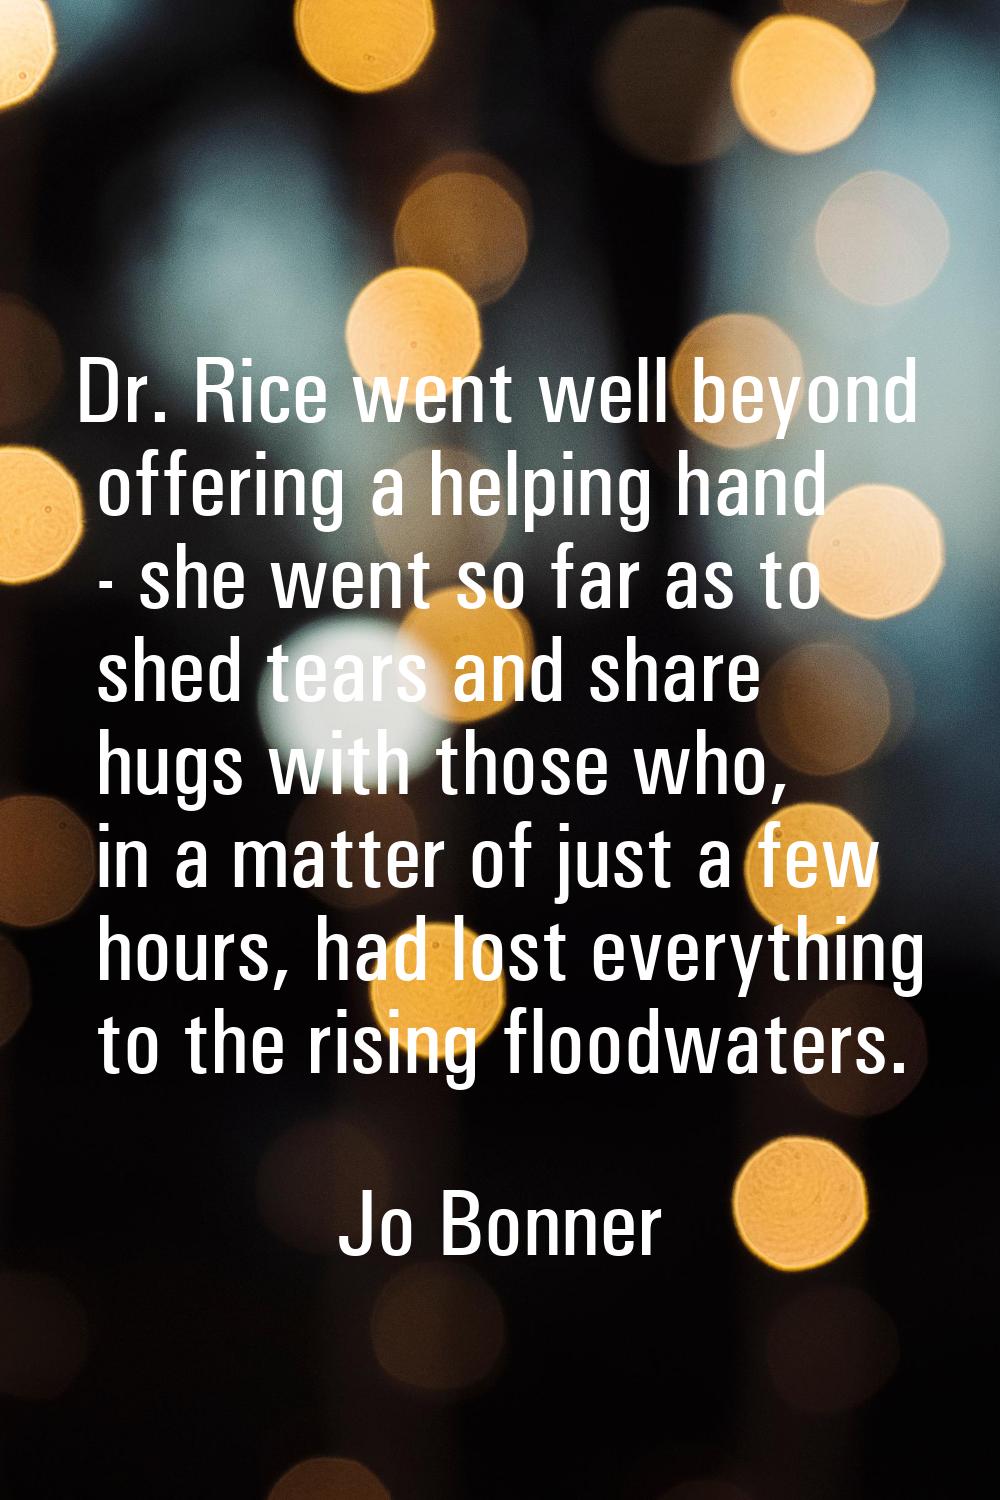 Dr. Rice went well beyond offering a helping hand - she went so far as to shed tears and share hugs